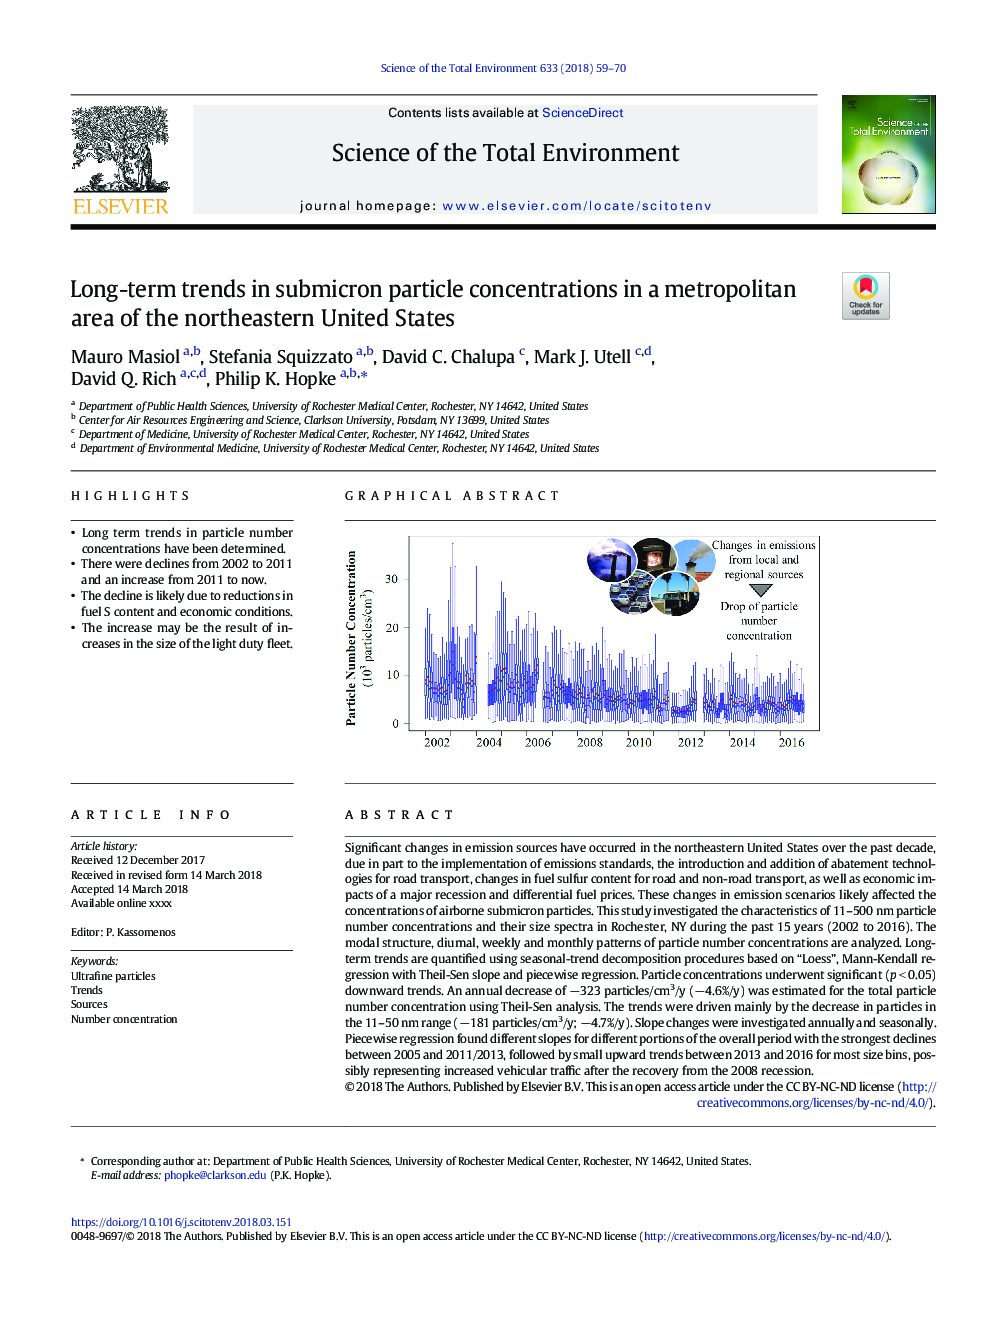 Long-term trends in submicron particle concentrations in a metropolitan area of the northeastern United States